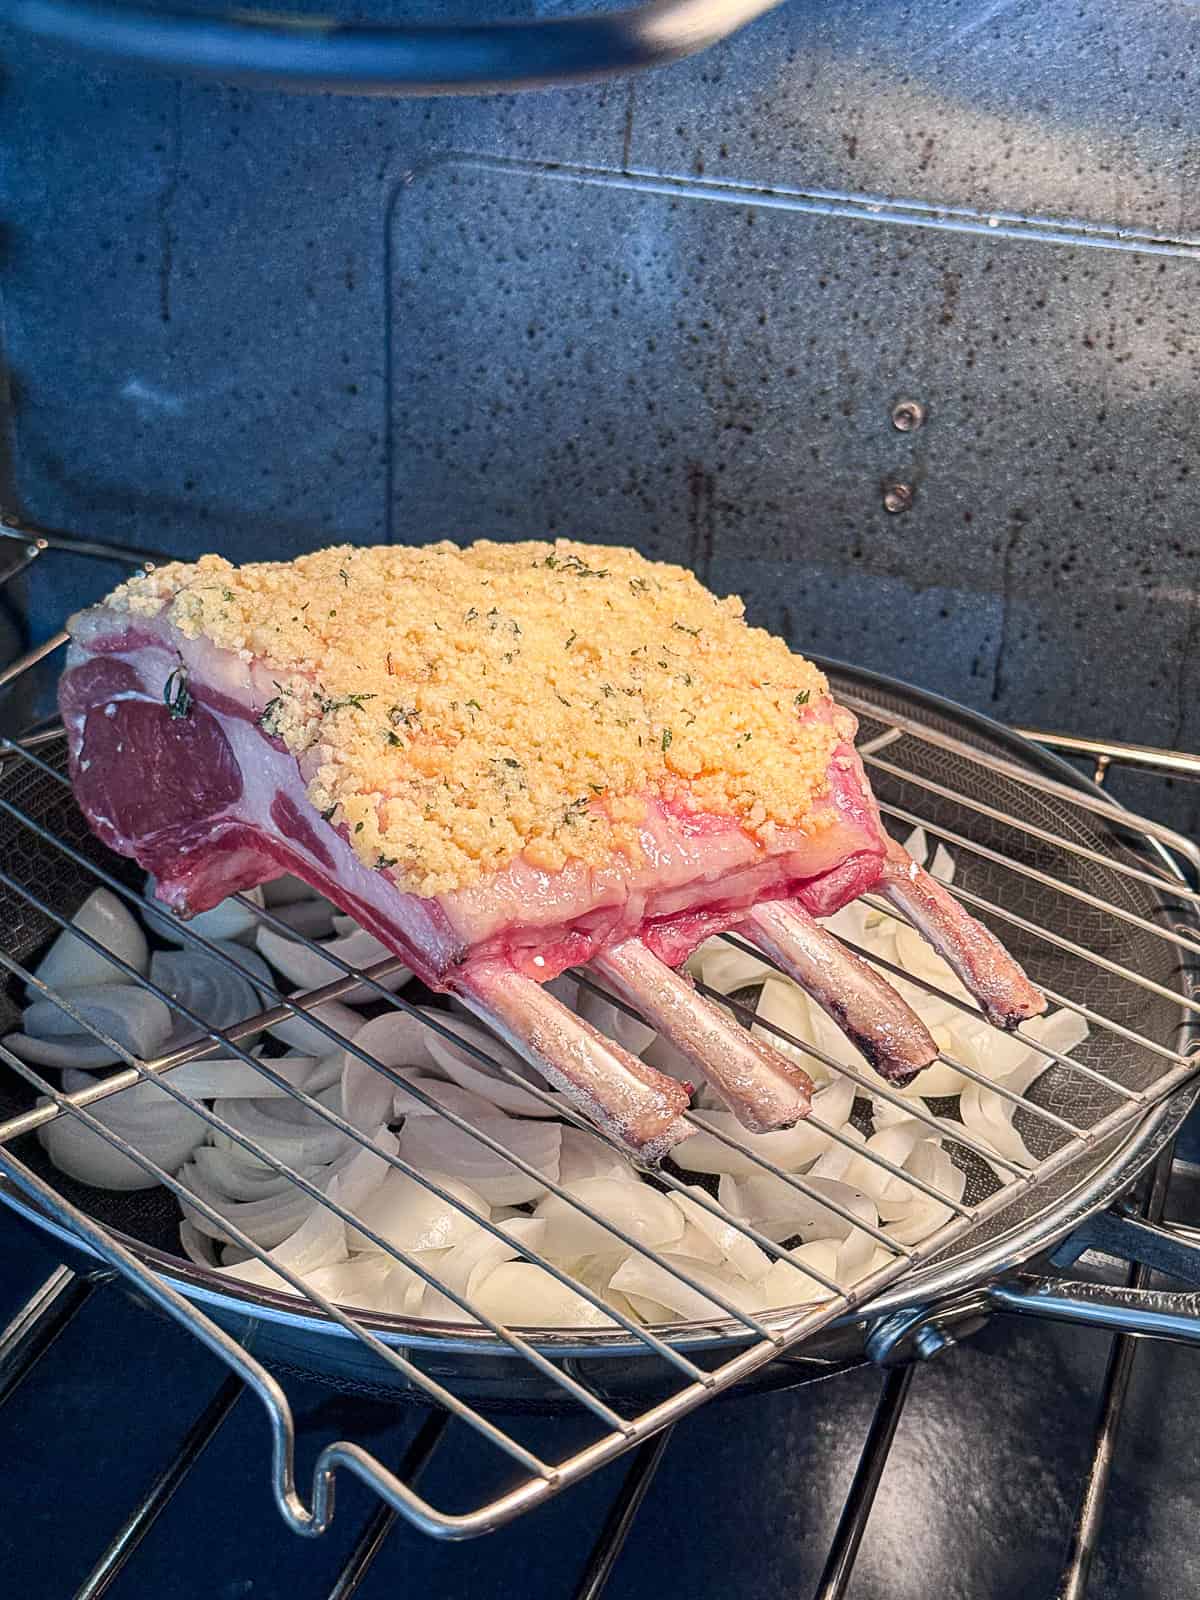 Baking Frenched Rack of Lamb in Oven